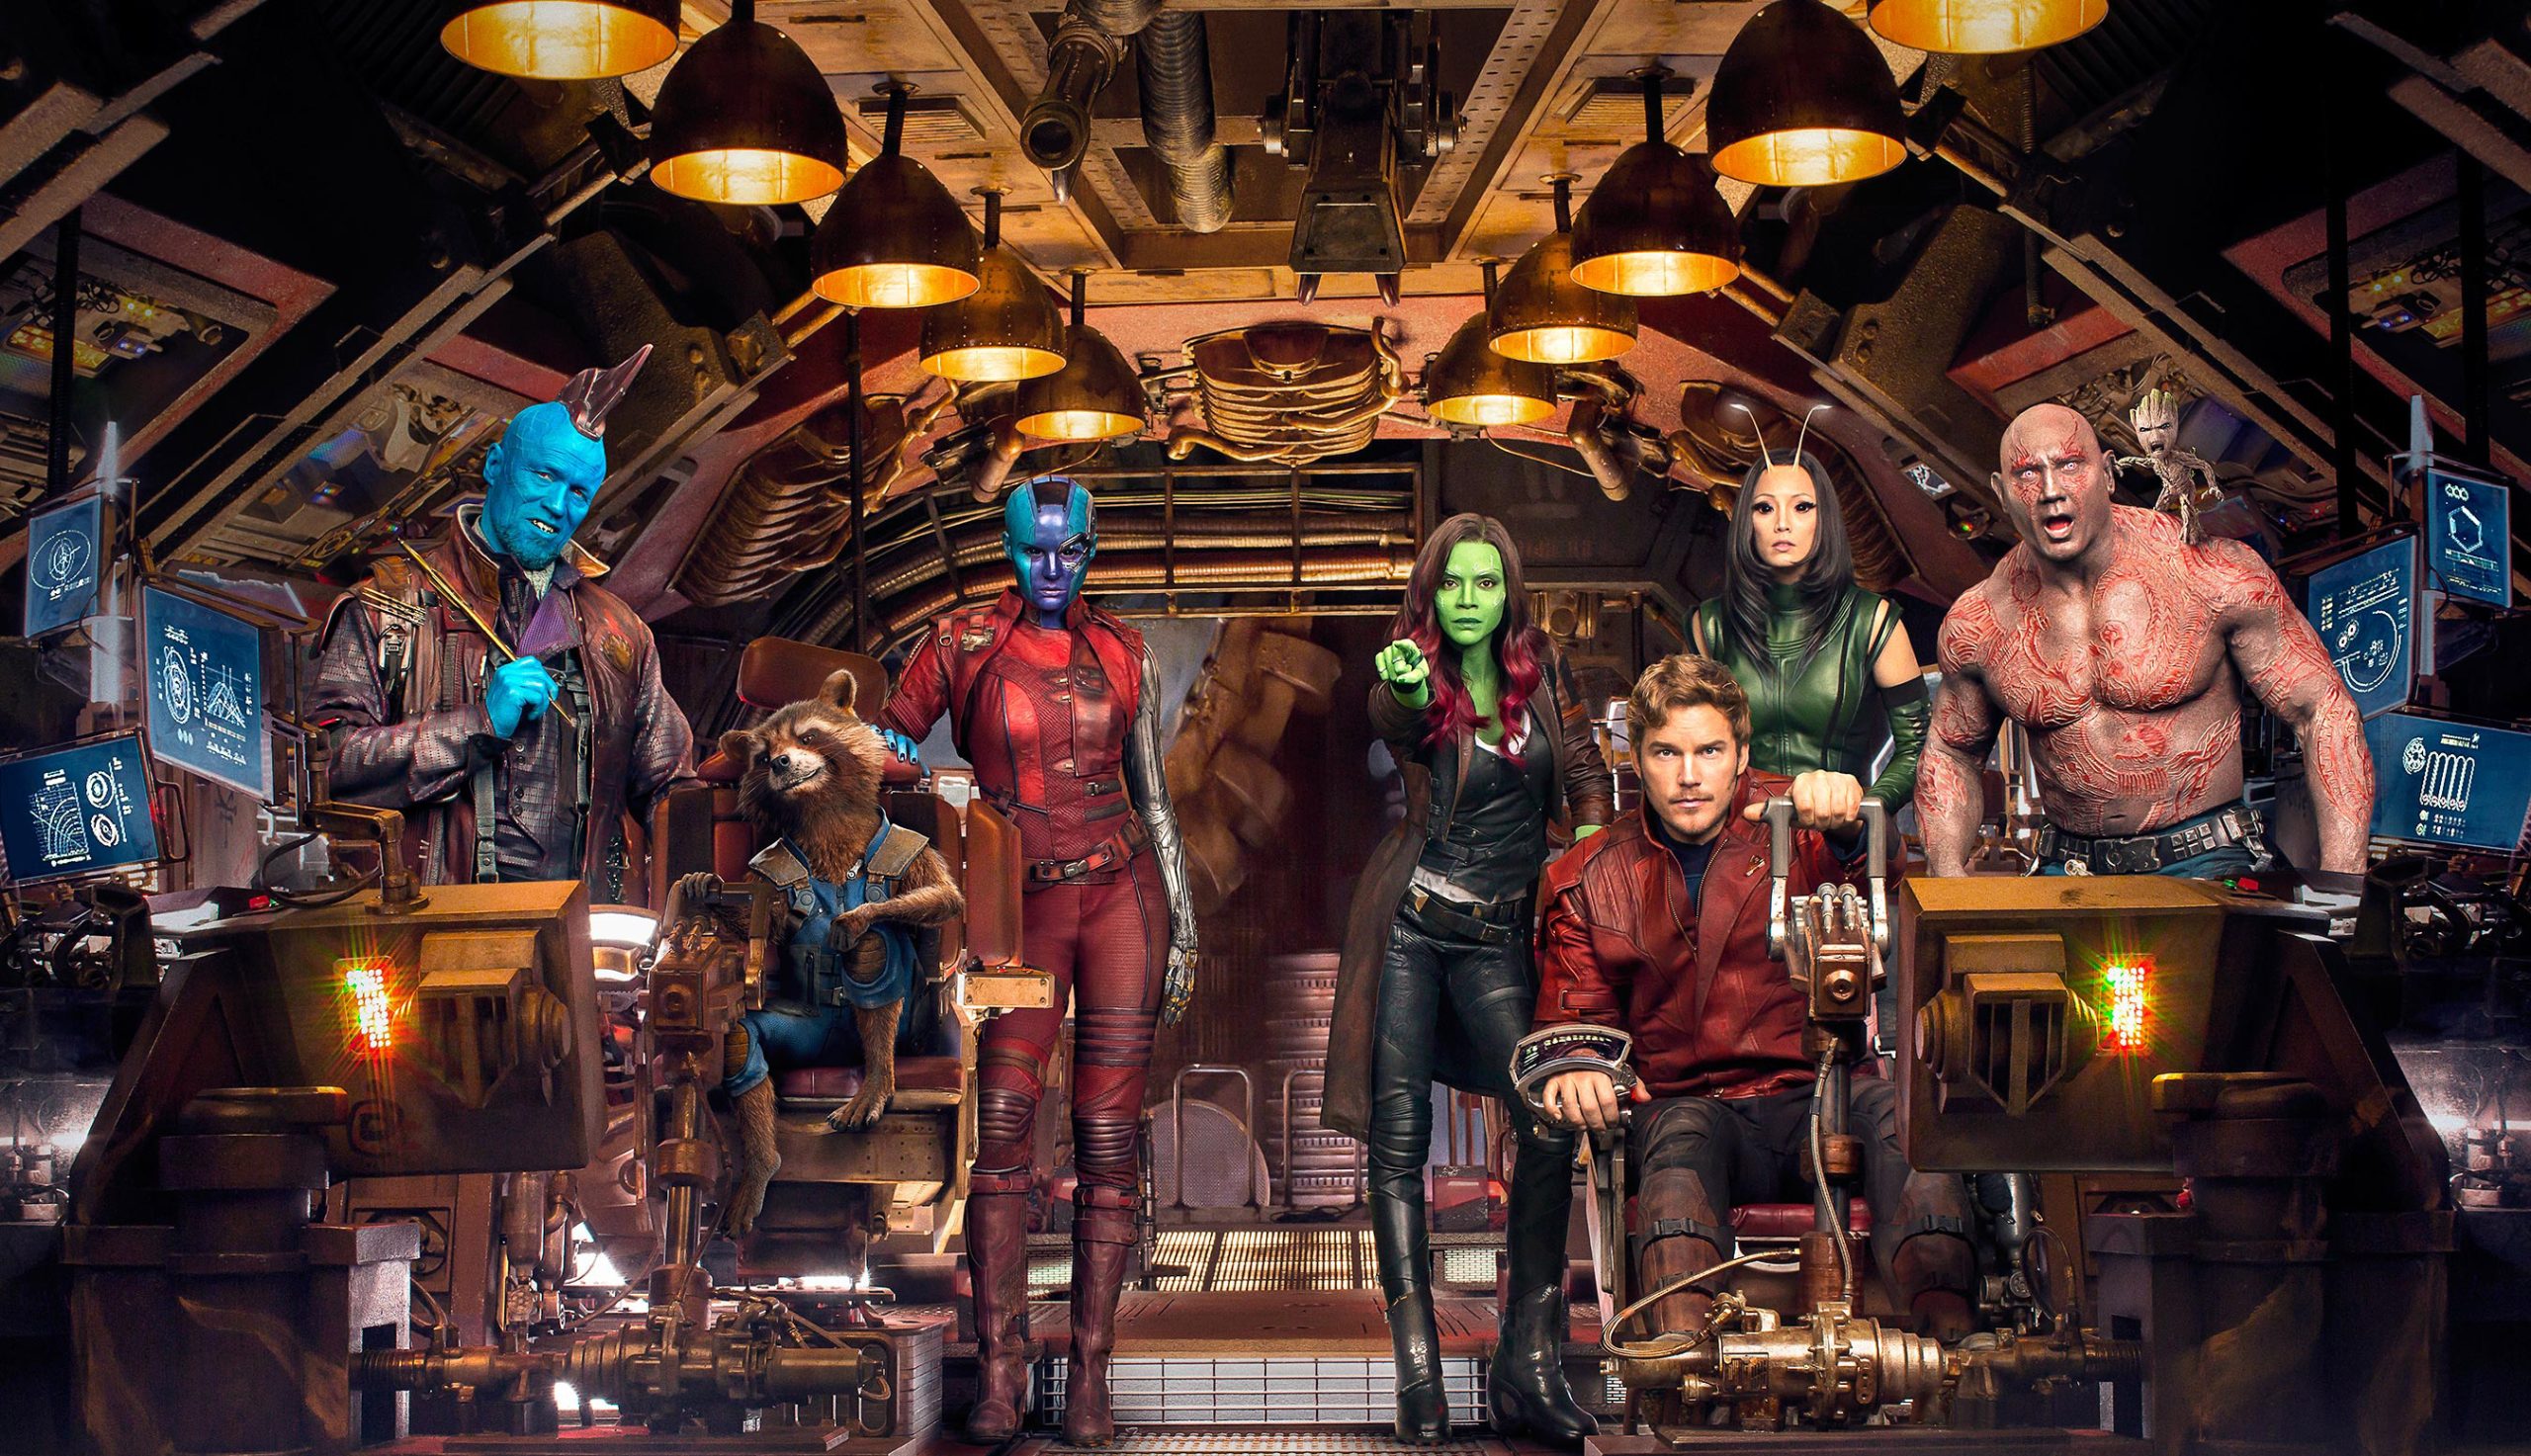 More characters were added by James Gunn in Guardians of the Galaxy Vol. 2 (2017).